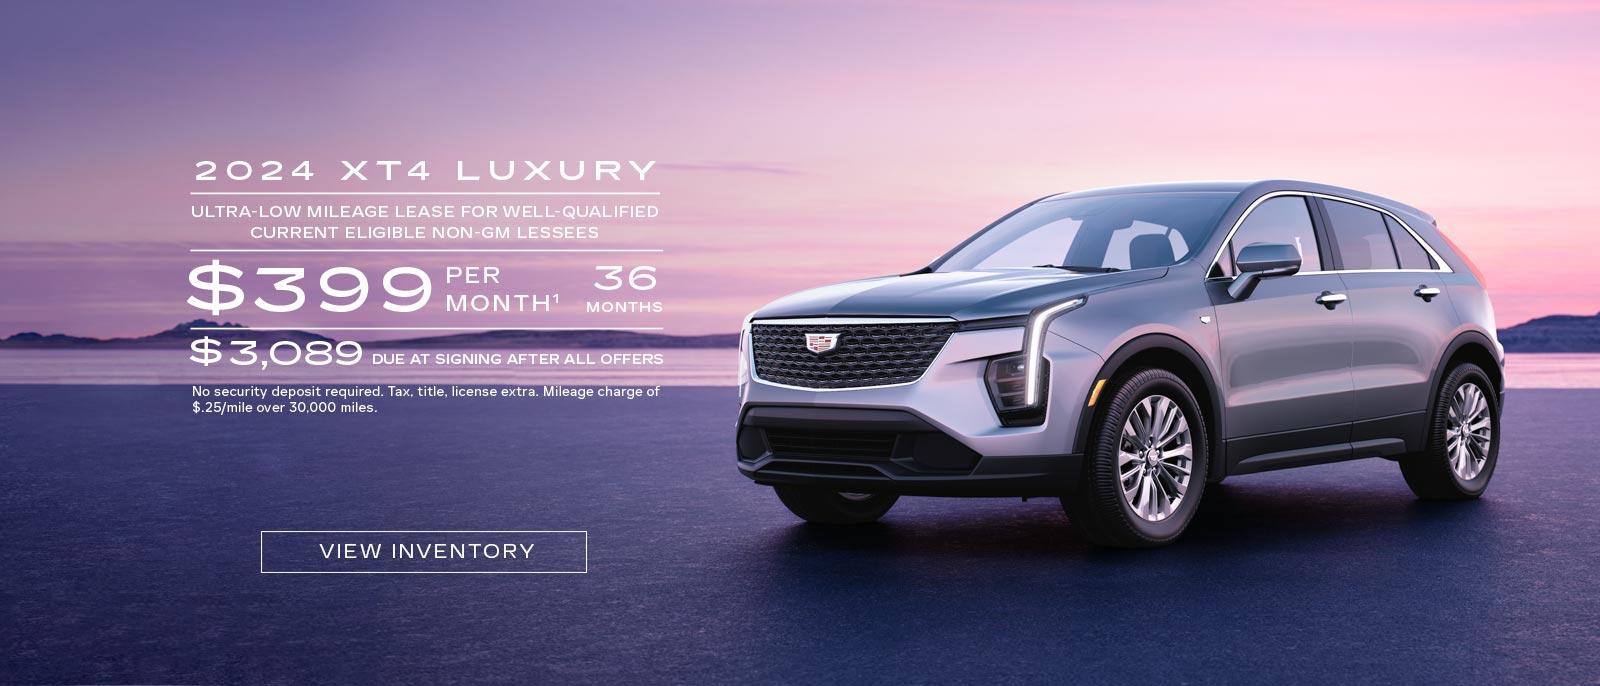 2024 XT4 Luxury. Ultra-low mileage lease for well-qualified current eligible Non-GM Lessees. $399 per month. 36 months. $3,089 due at signing after all offers.